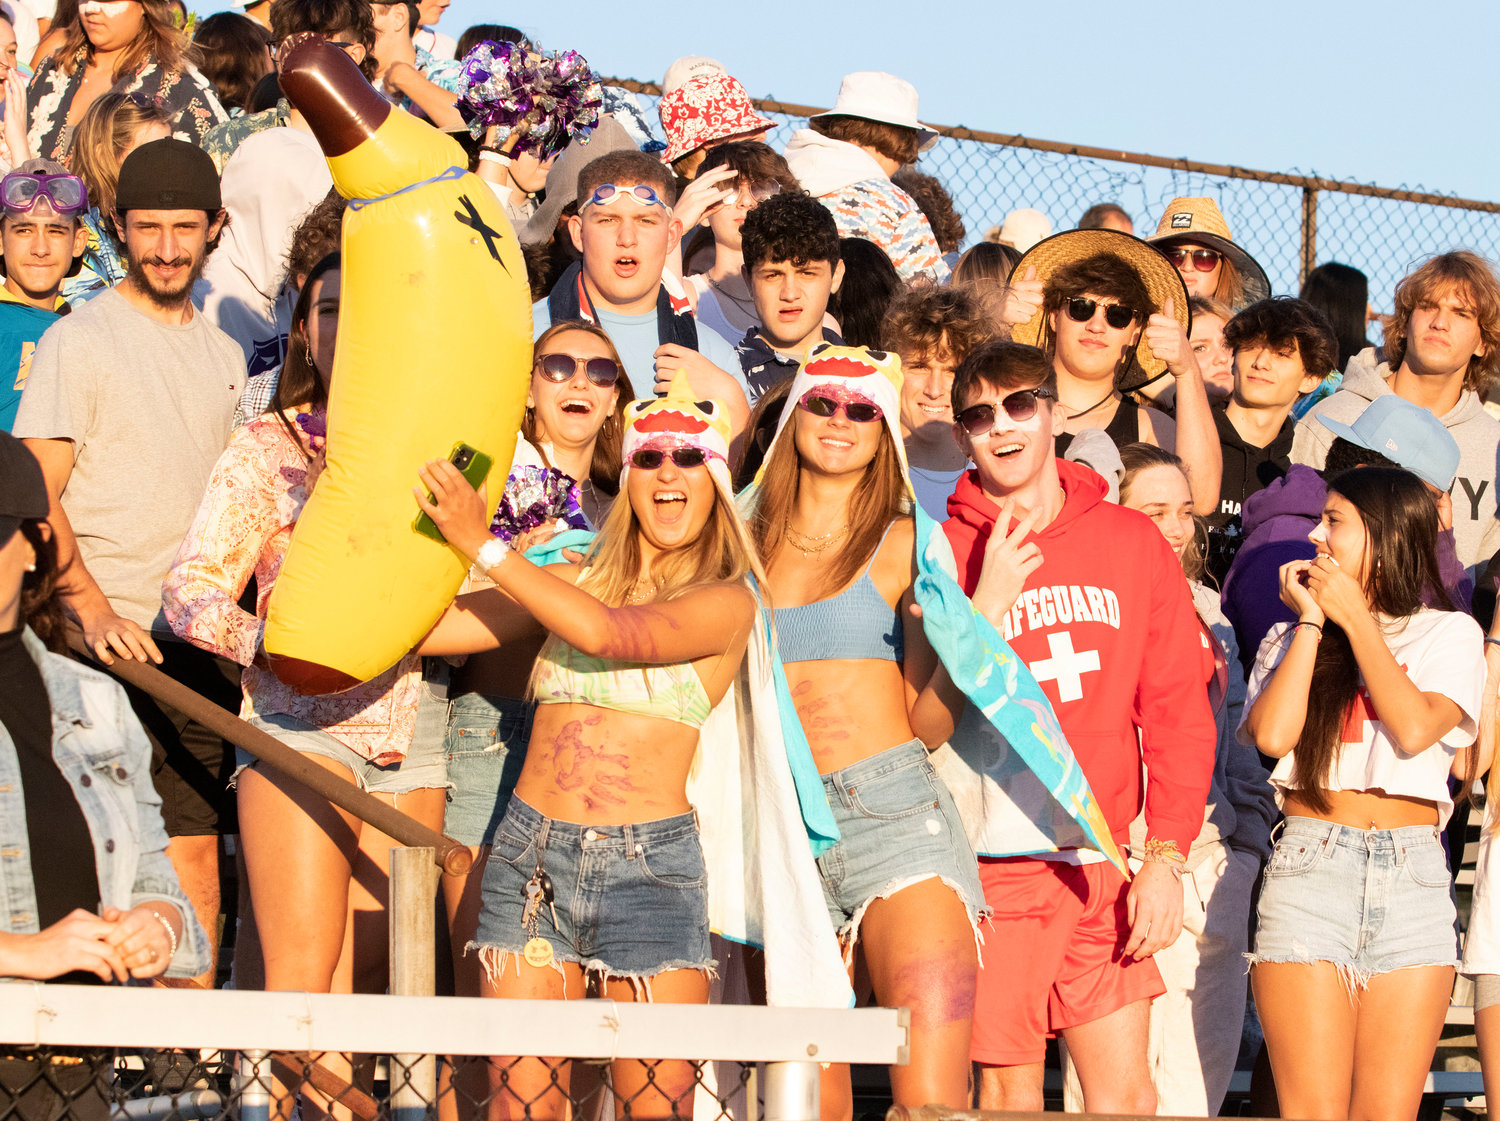 The Huskies Dog Pound went with a beach party theme for the Huskies first home football game on Thursday.